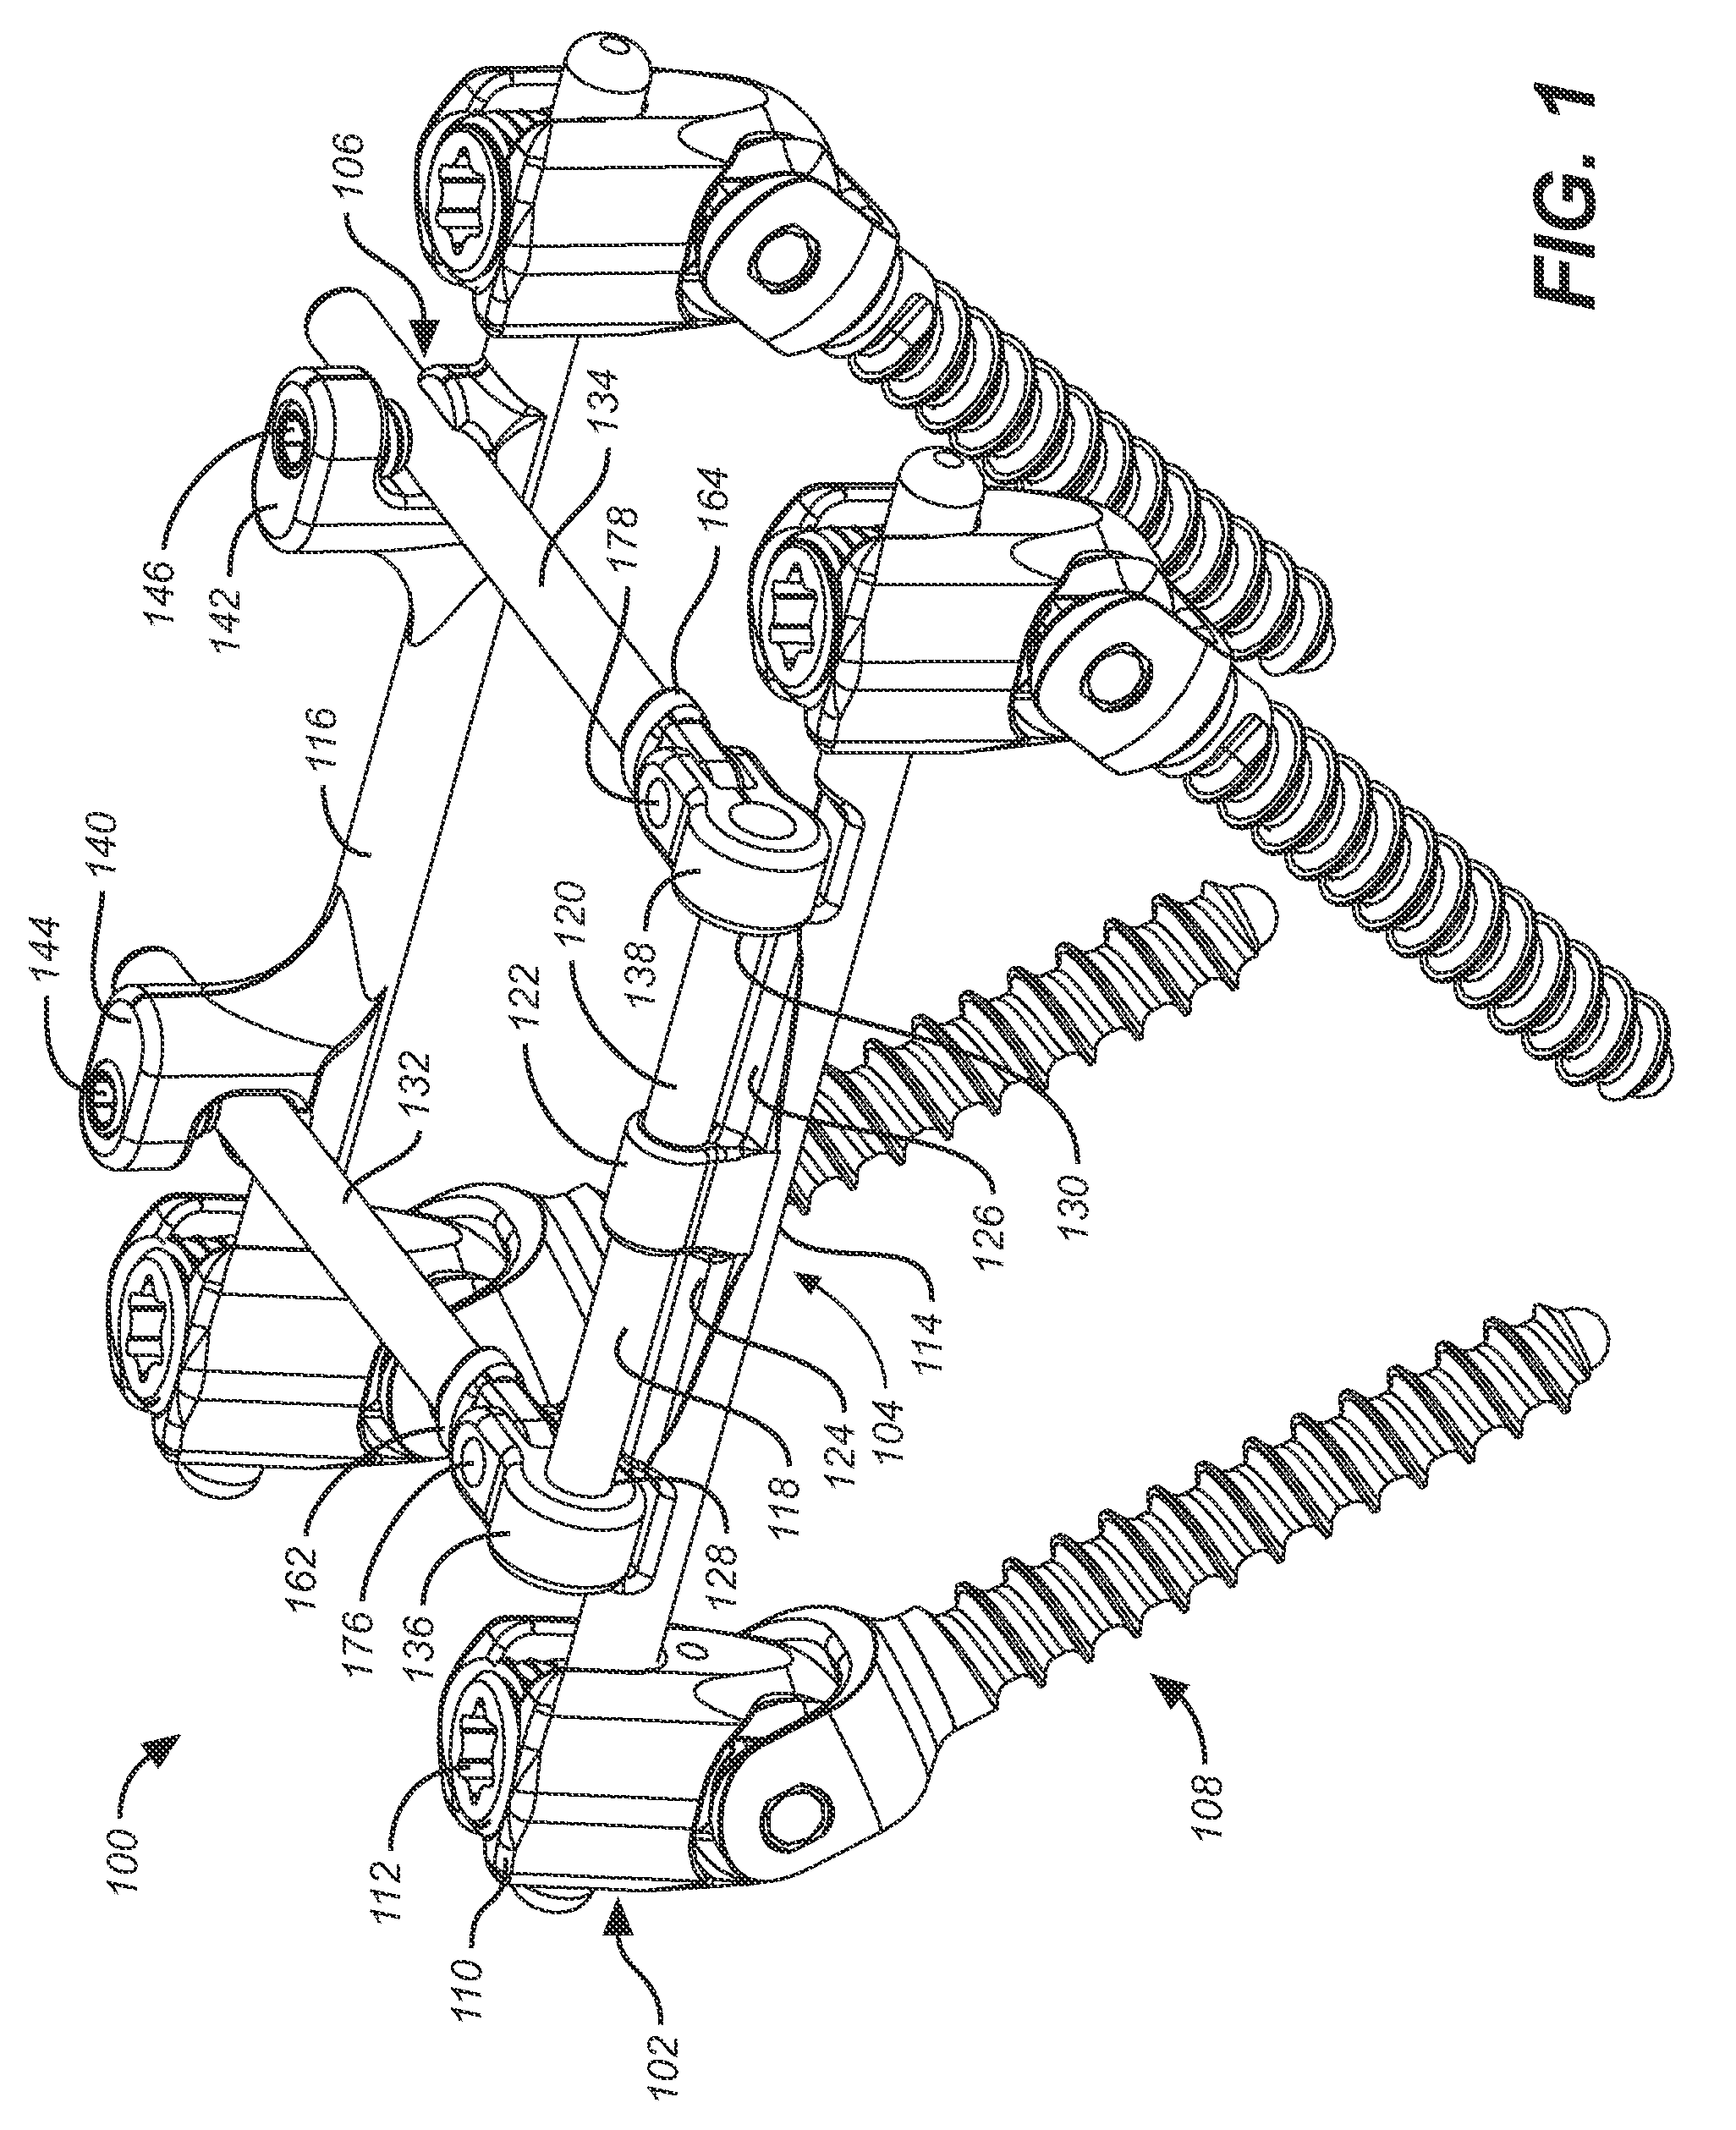 Revision system for a dynamic stabilization and motion preservation spinal implantation system and method